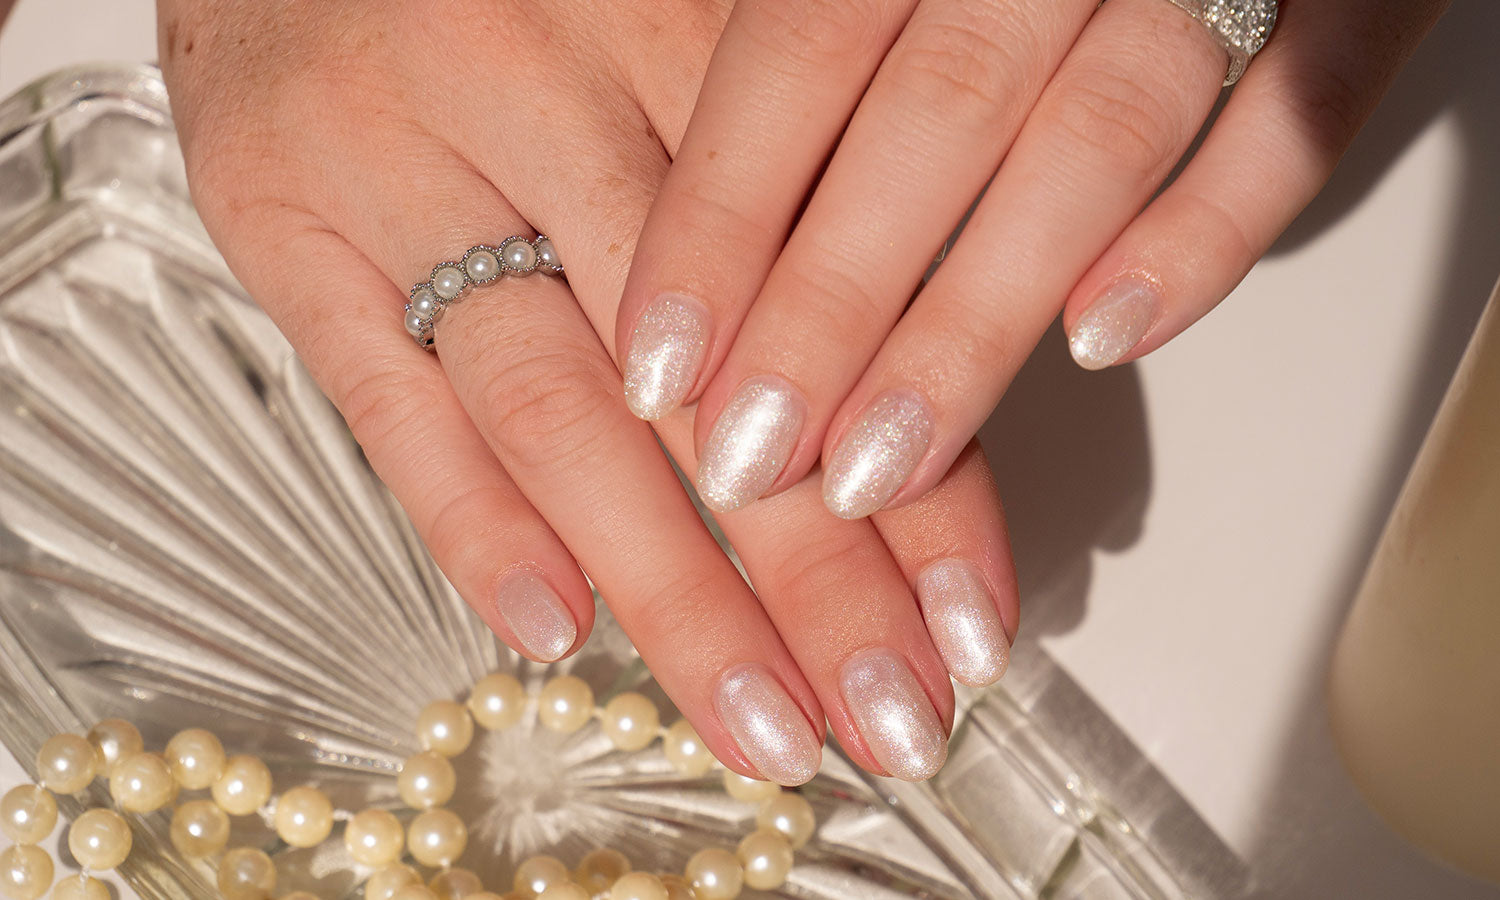 Gelous Pearlescent Moonstone gel nail polish - photographed in Australia on model